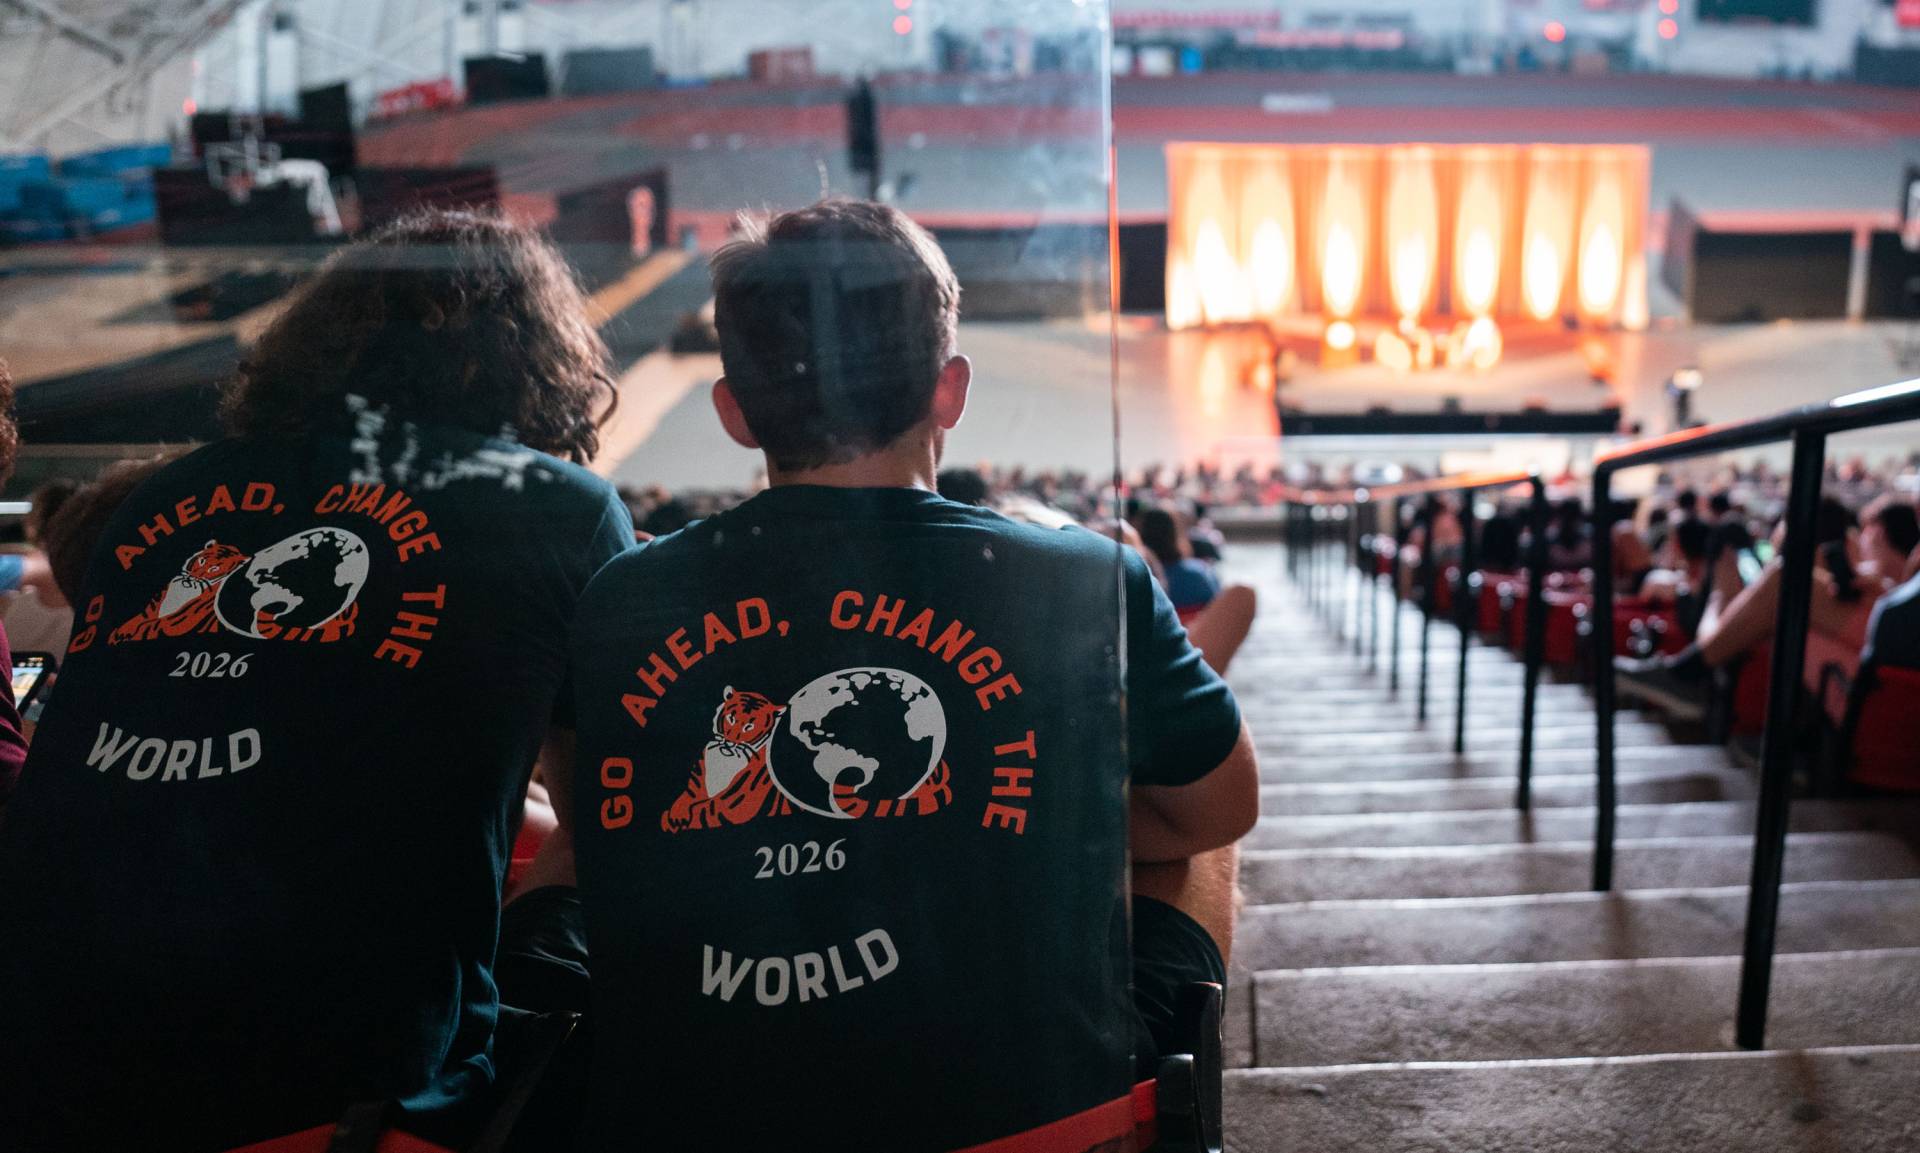 students in the audience wear t-shirts that read "Go ahead. Change the world. 2026"